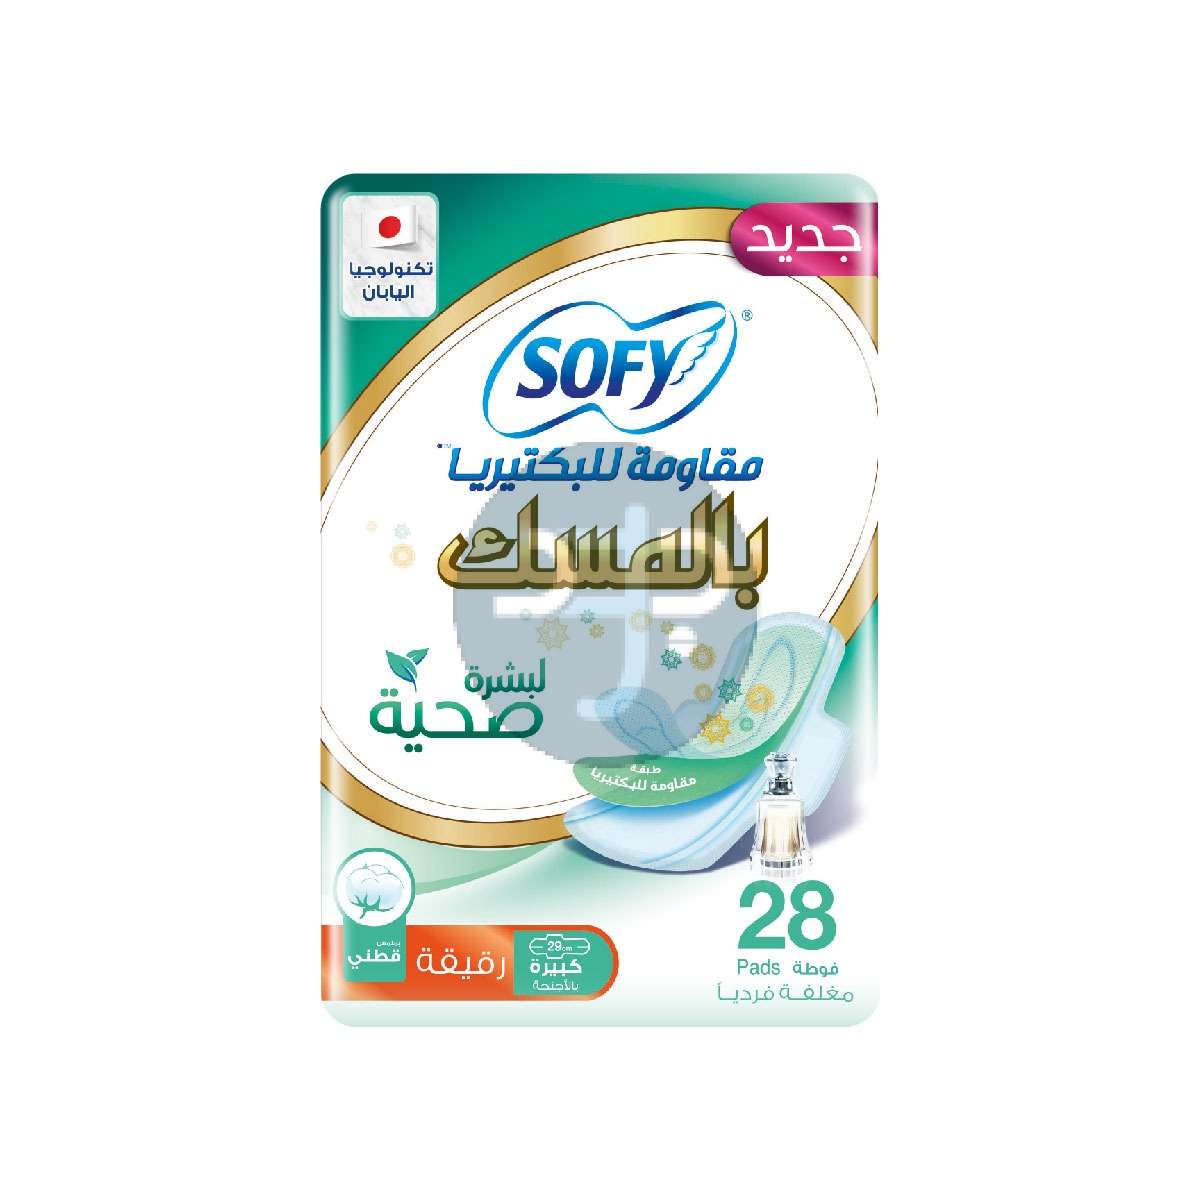 Product-SOFY Anti-Bacterial with Musk Sanitary Pads with Wings, Slim, Large 29 cm, Pack of 28 Pads